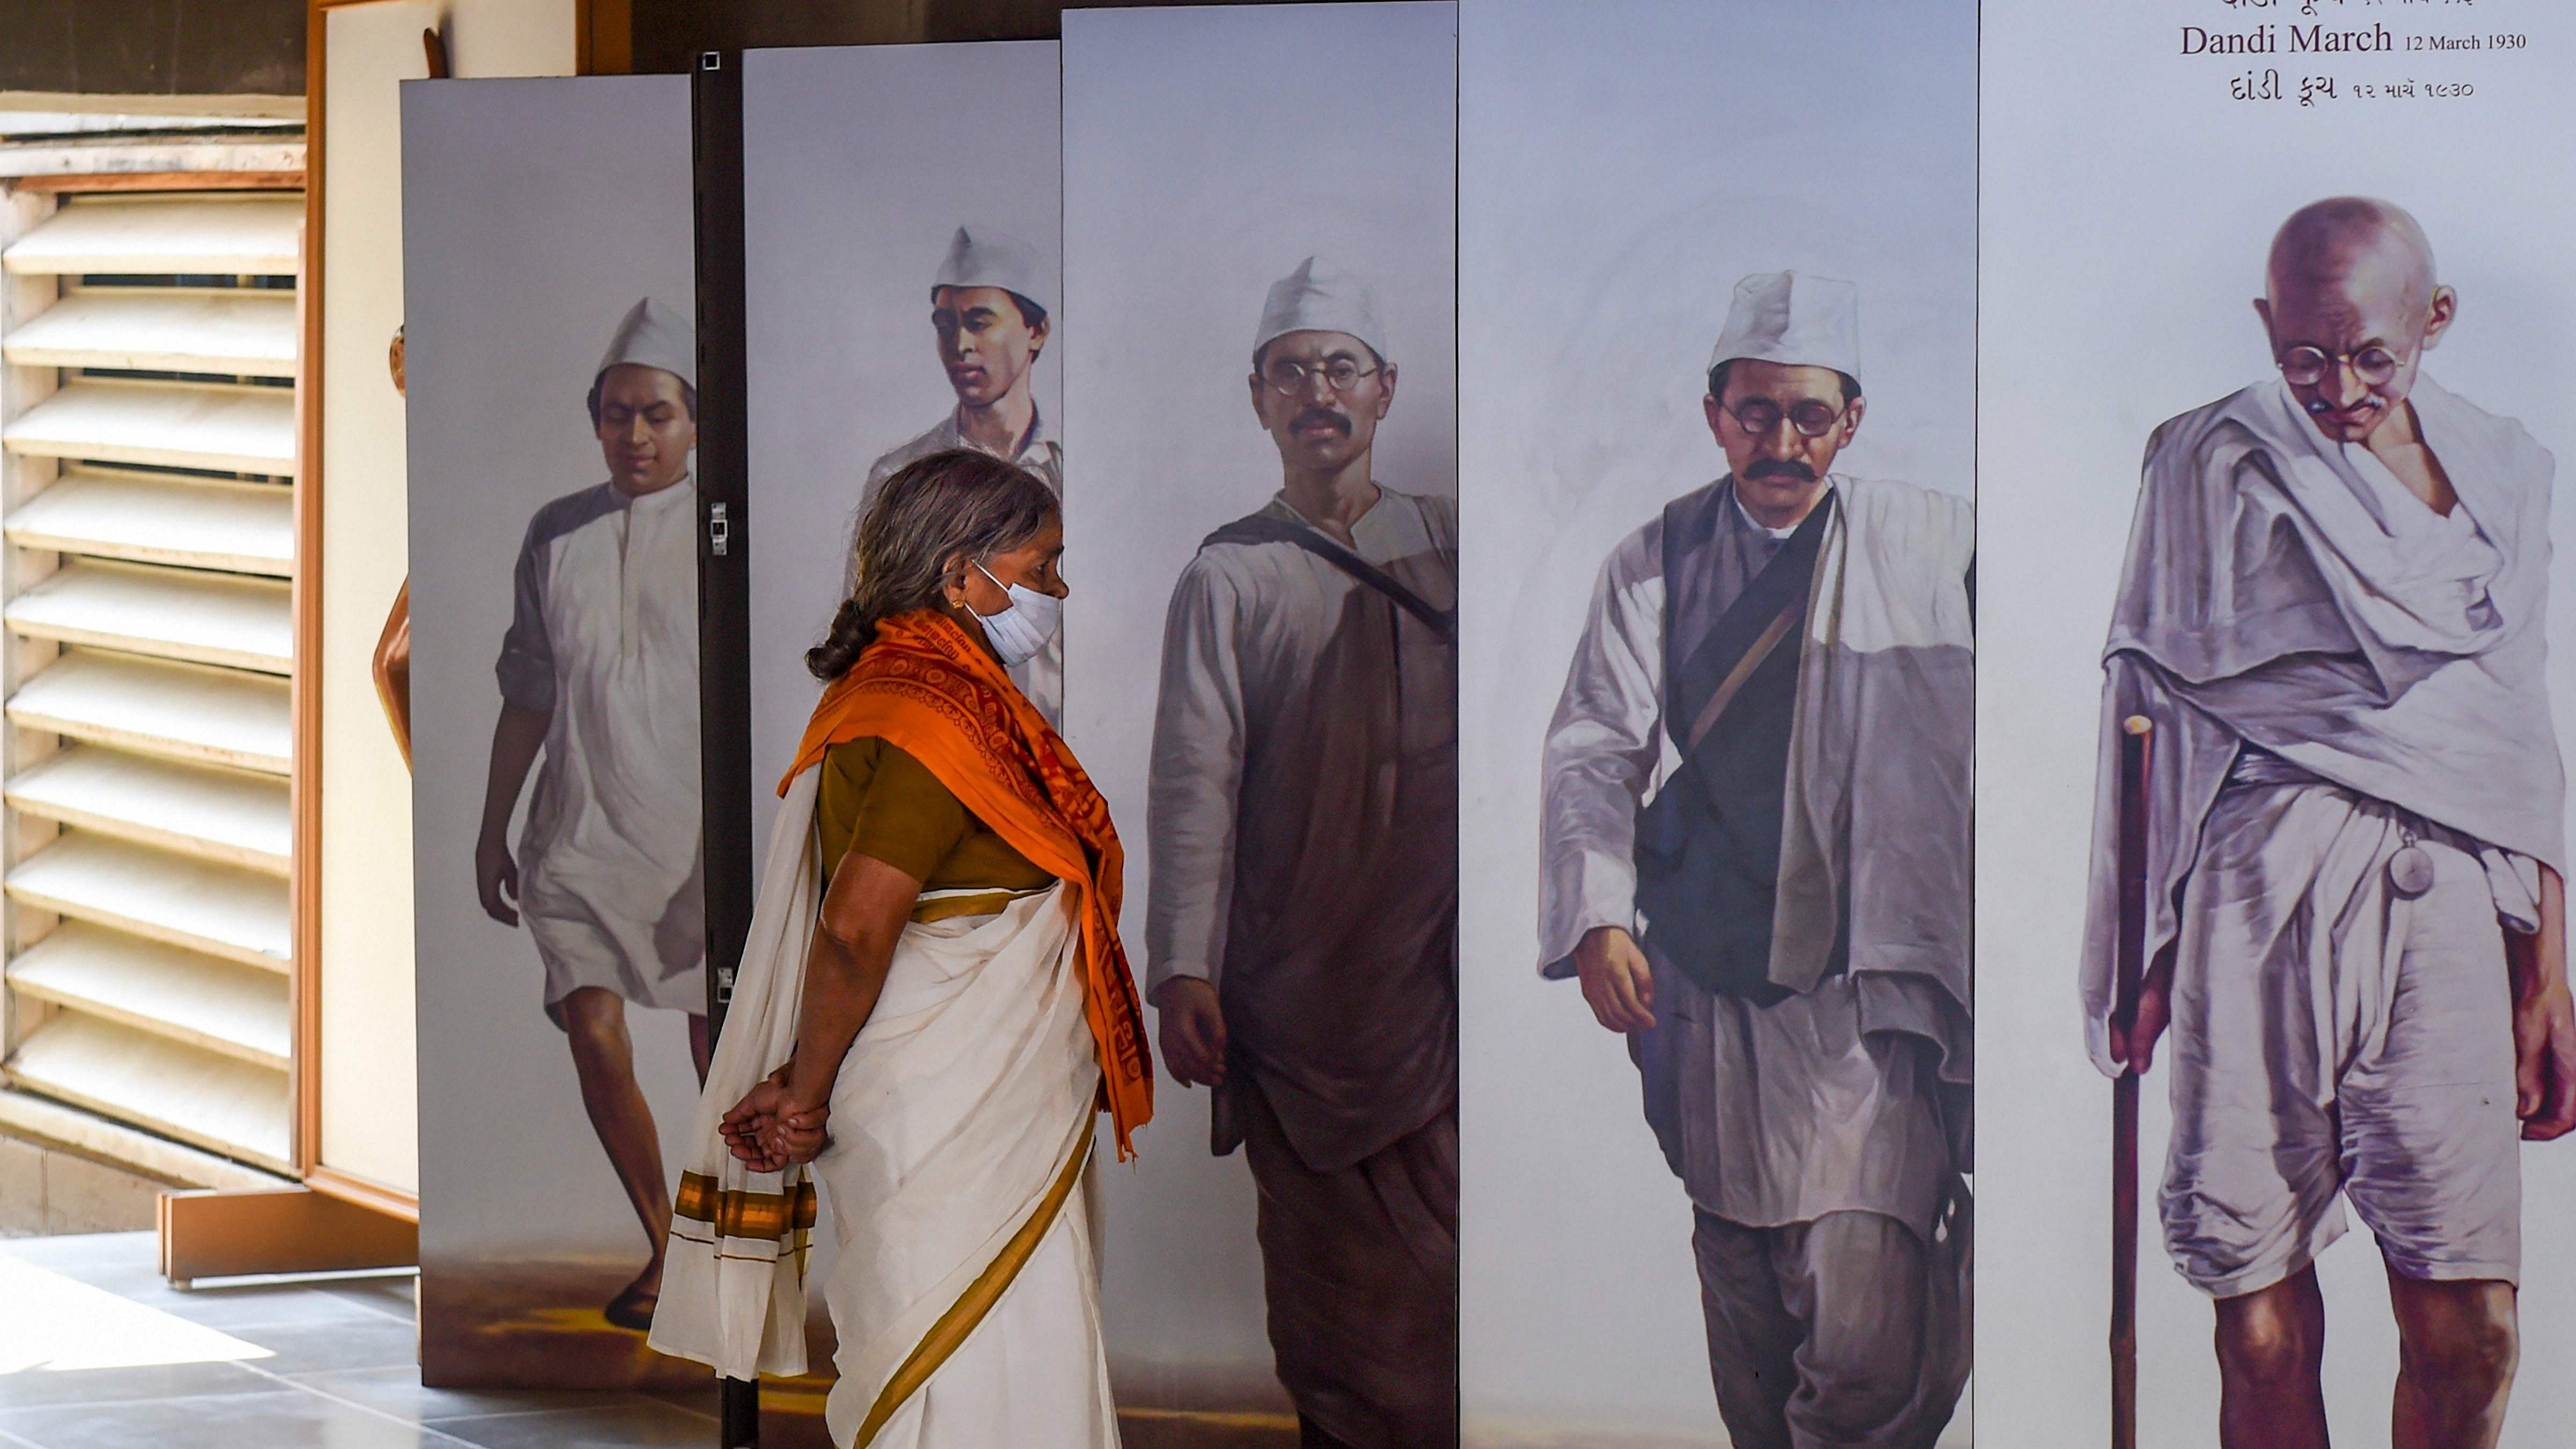  A visitor looks at photographs of the 'Dandi March' at a museum inside the Sabarmati Ashram, in Ahmedabad. Credit: PTI Photo